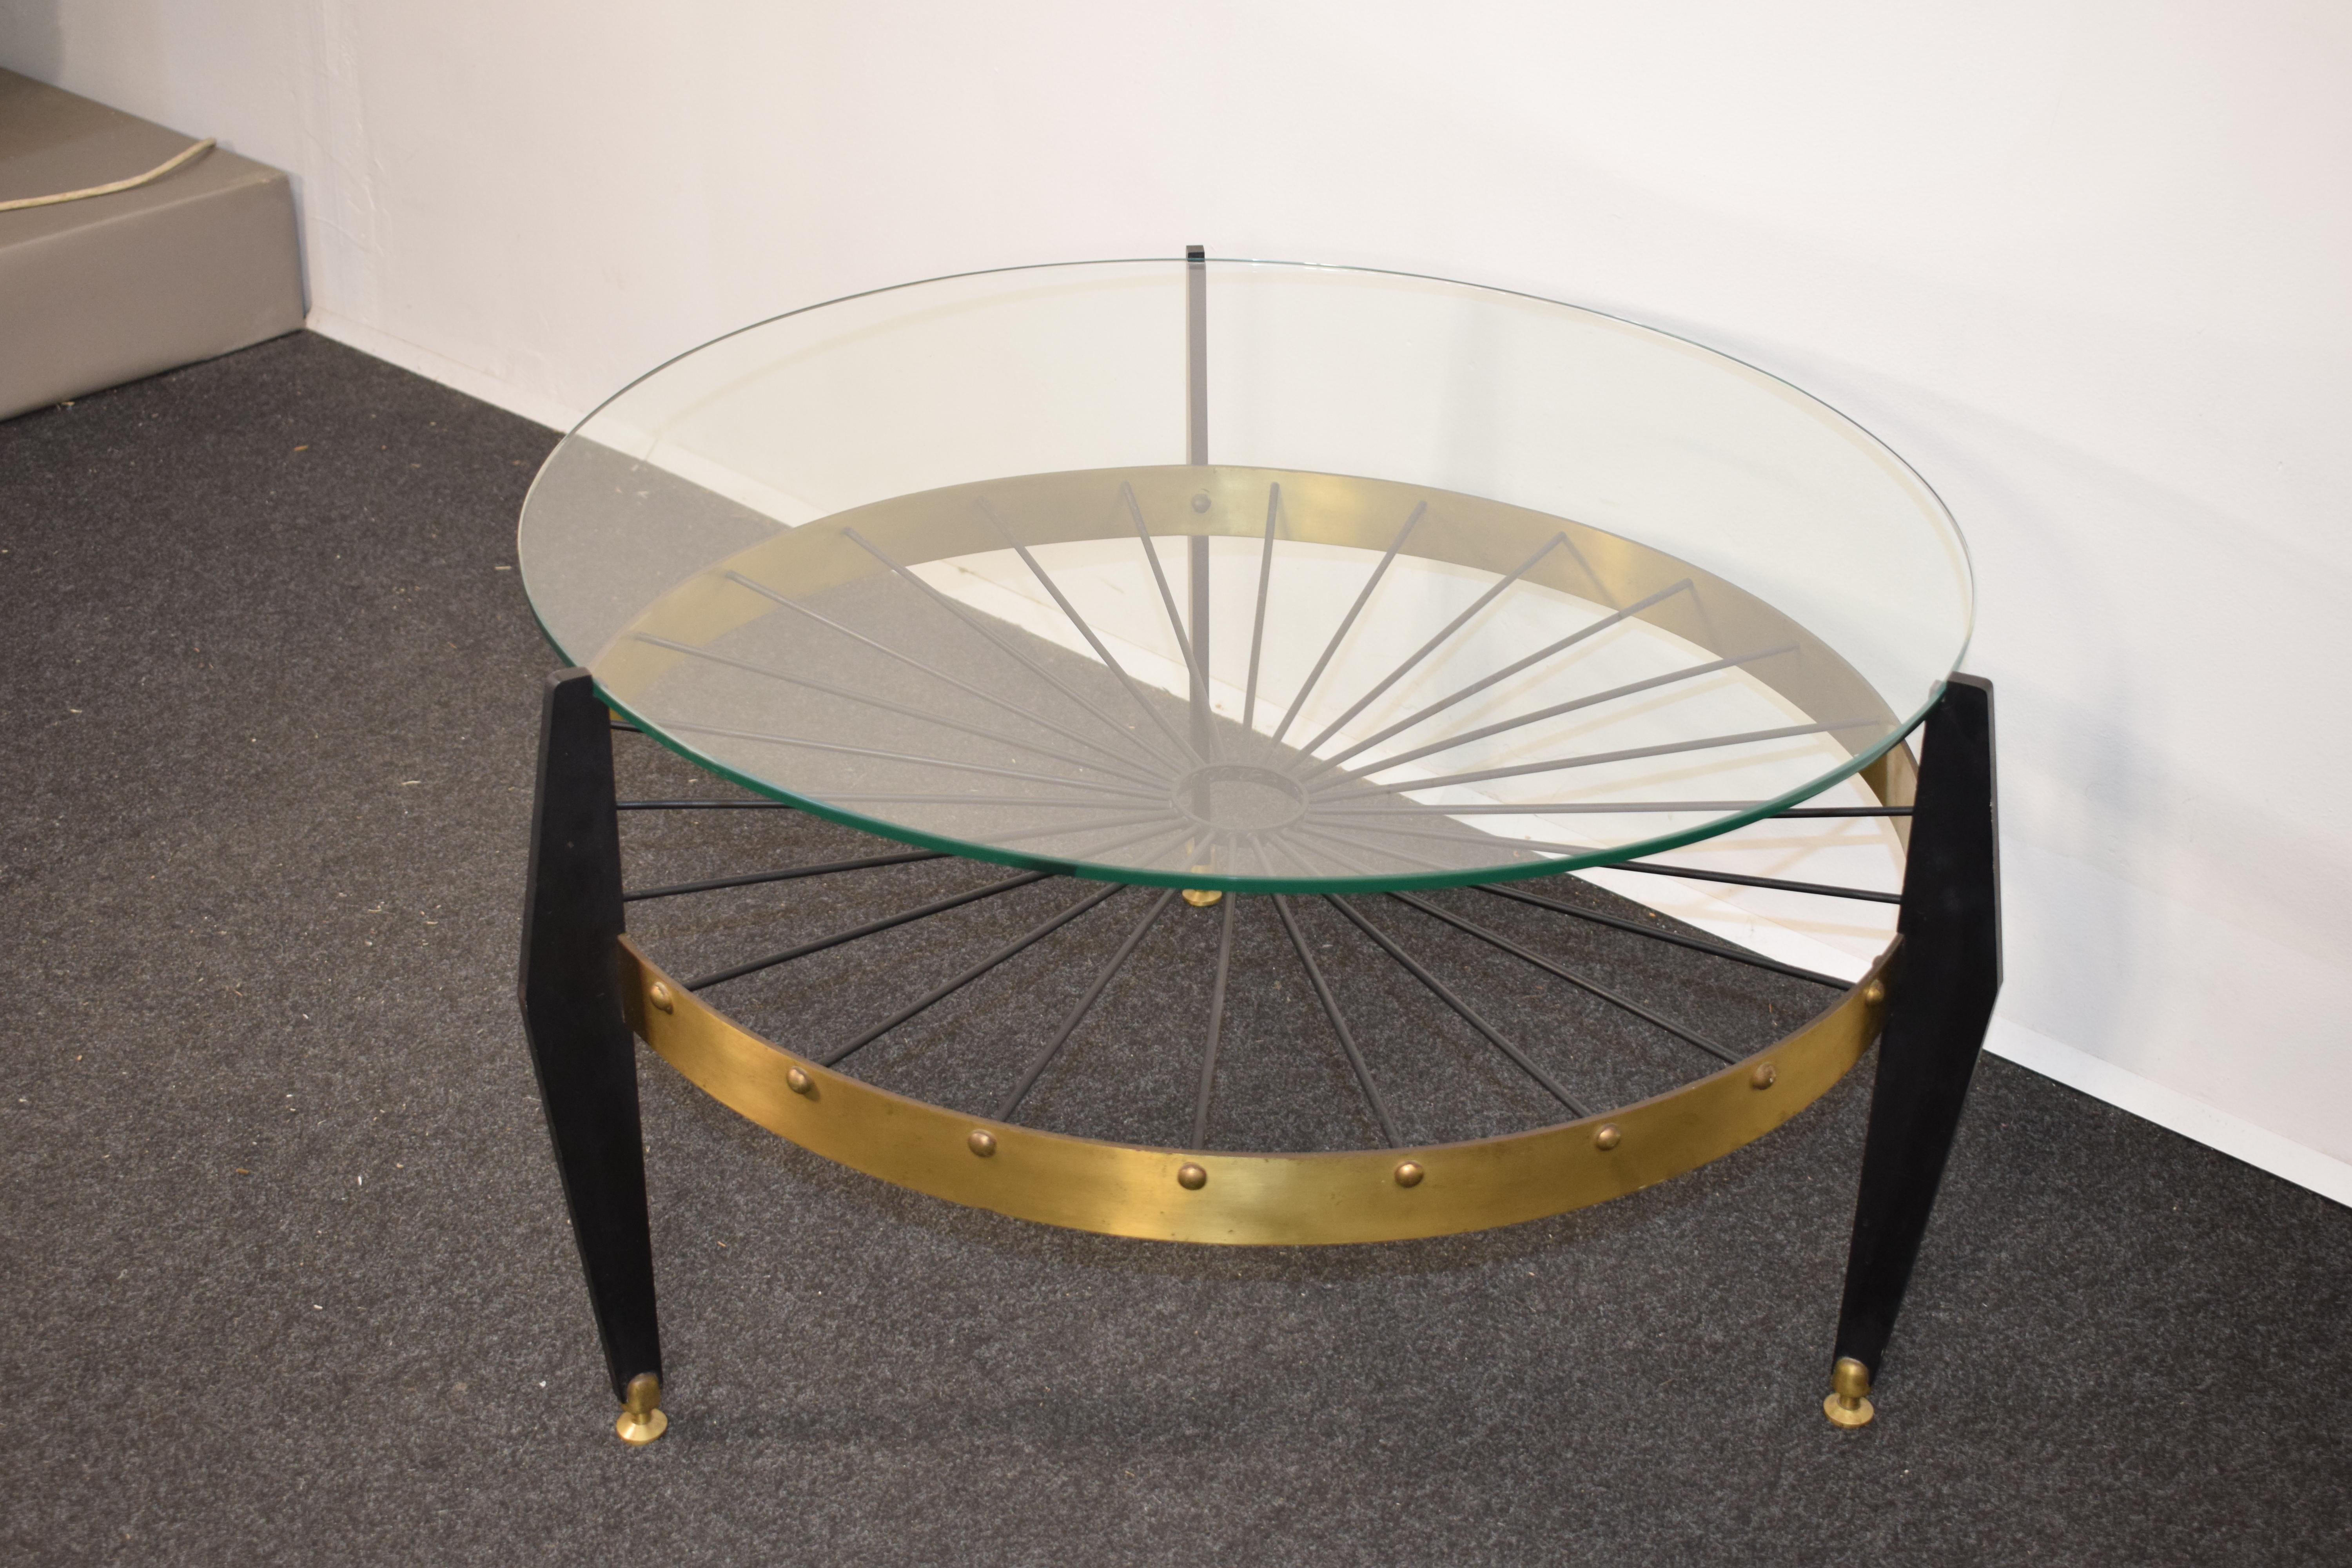 Italian round coffee table, brass, metal and glass, 1950s.

Dimensions: H= 42 cm; D= 75 cm.